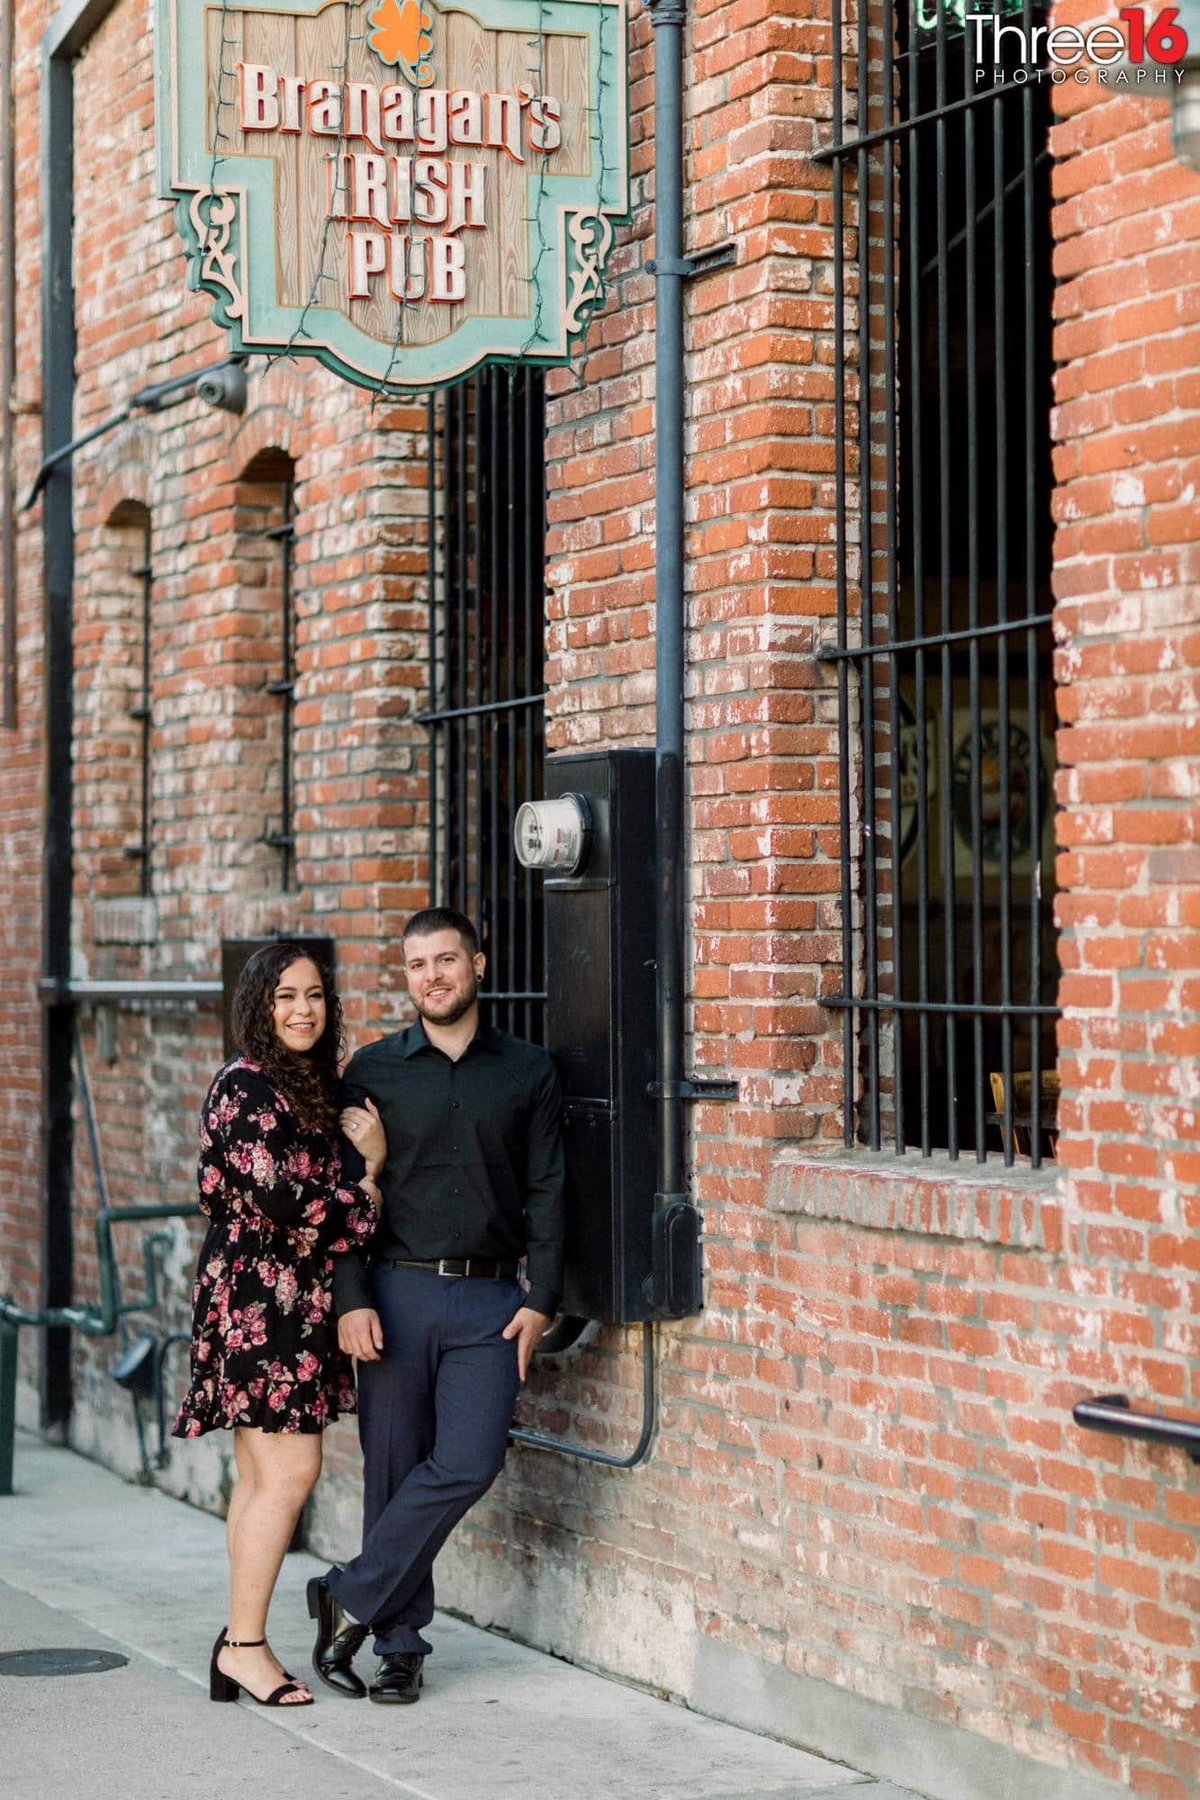 Engaged couple pose together against a brick wall in the back alley of downtown Fullerton